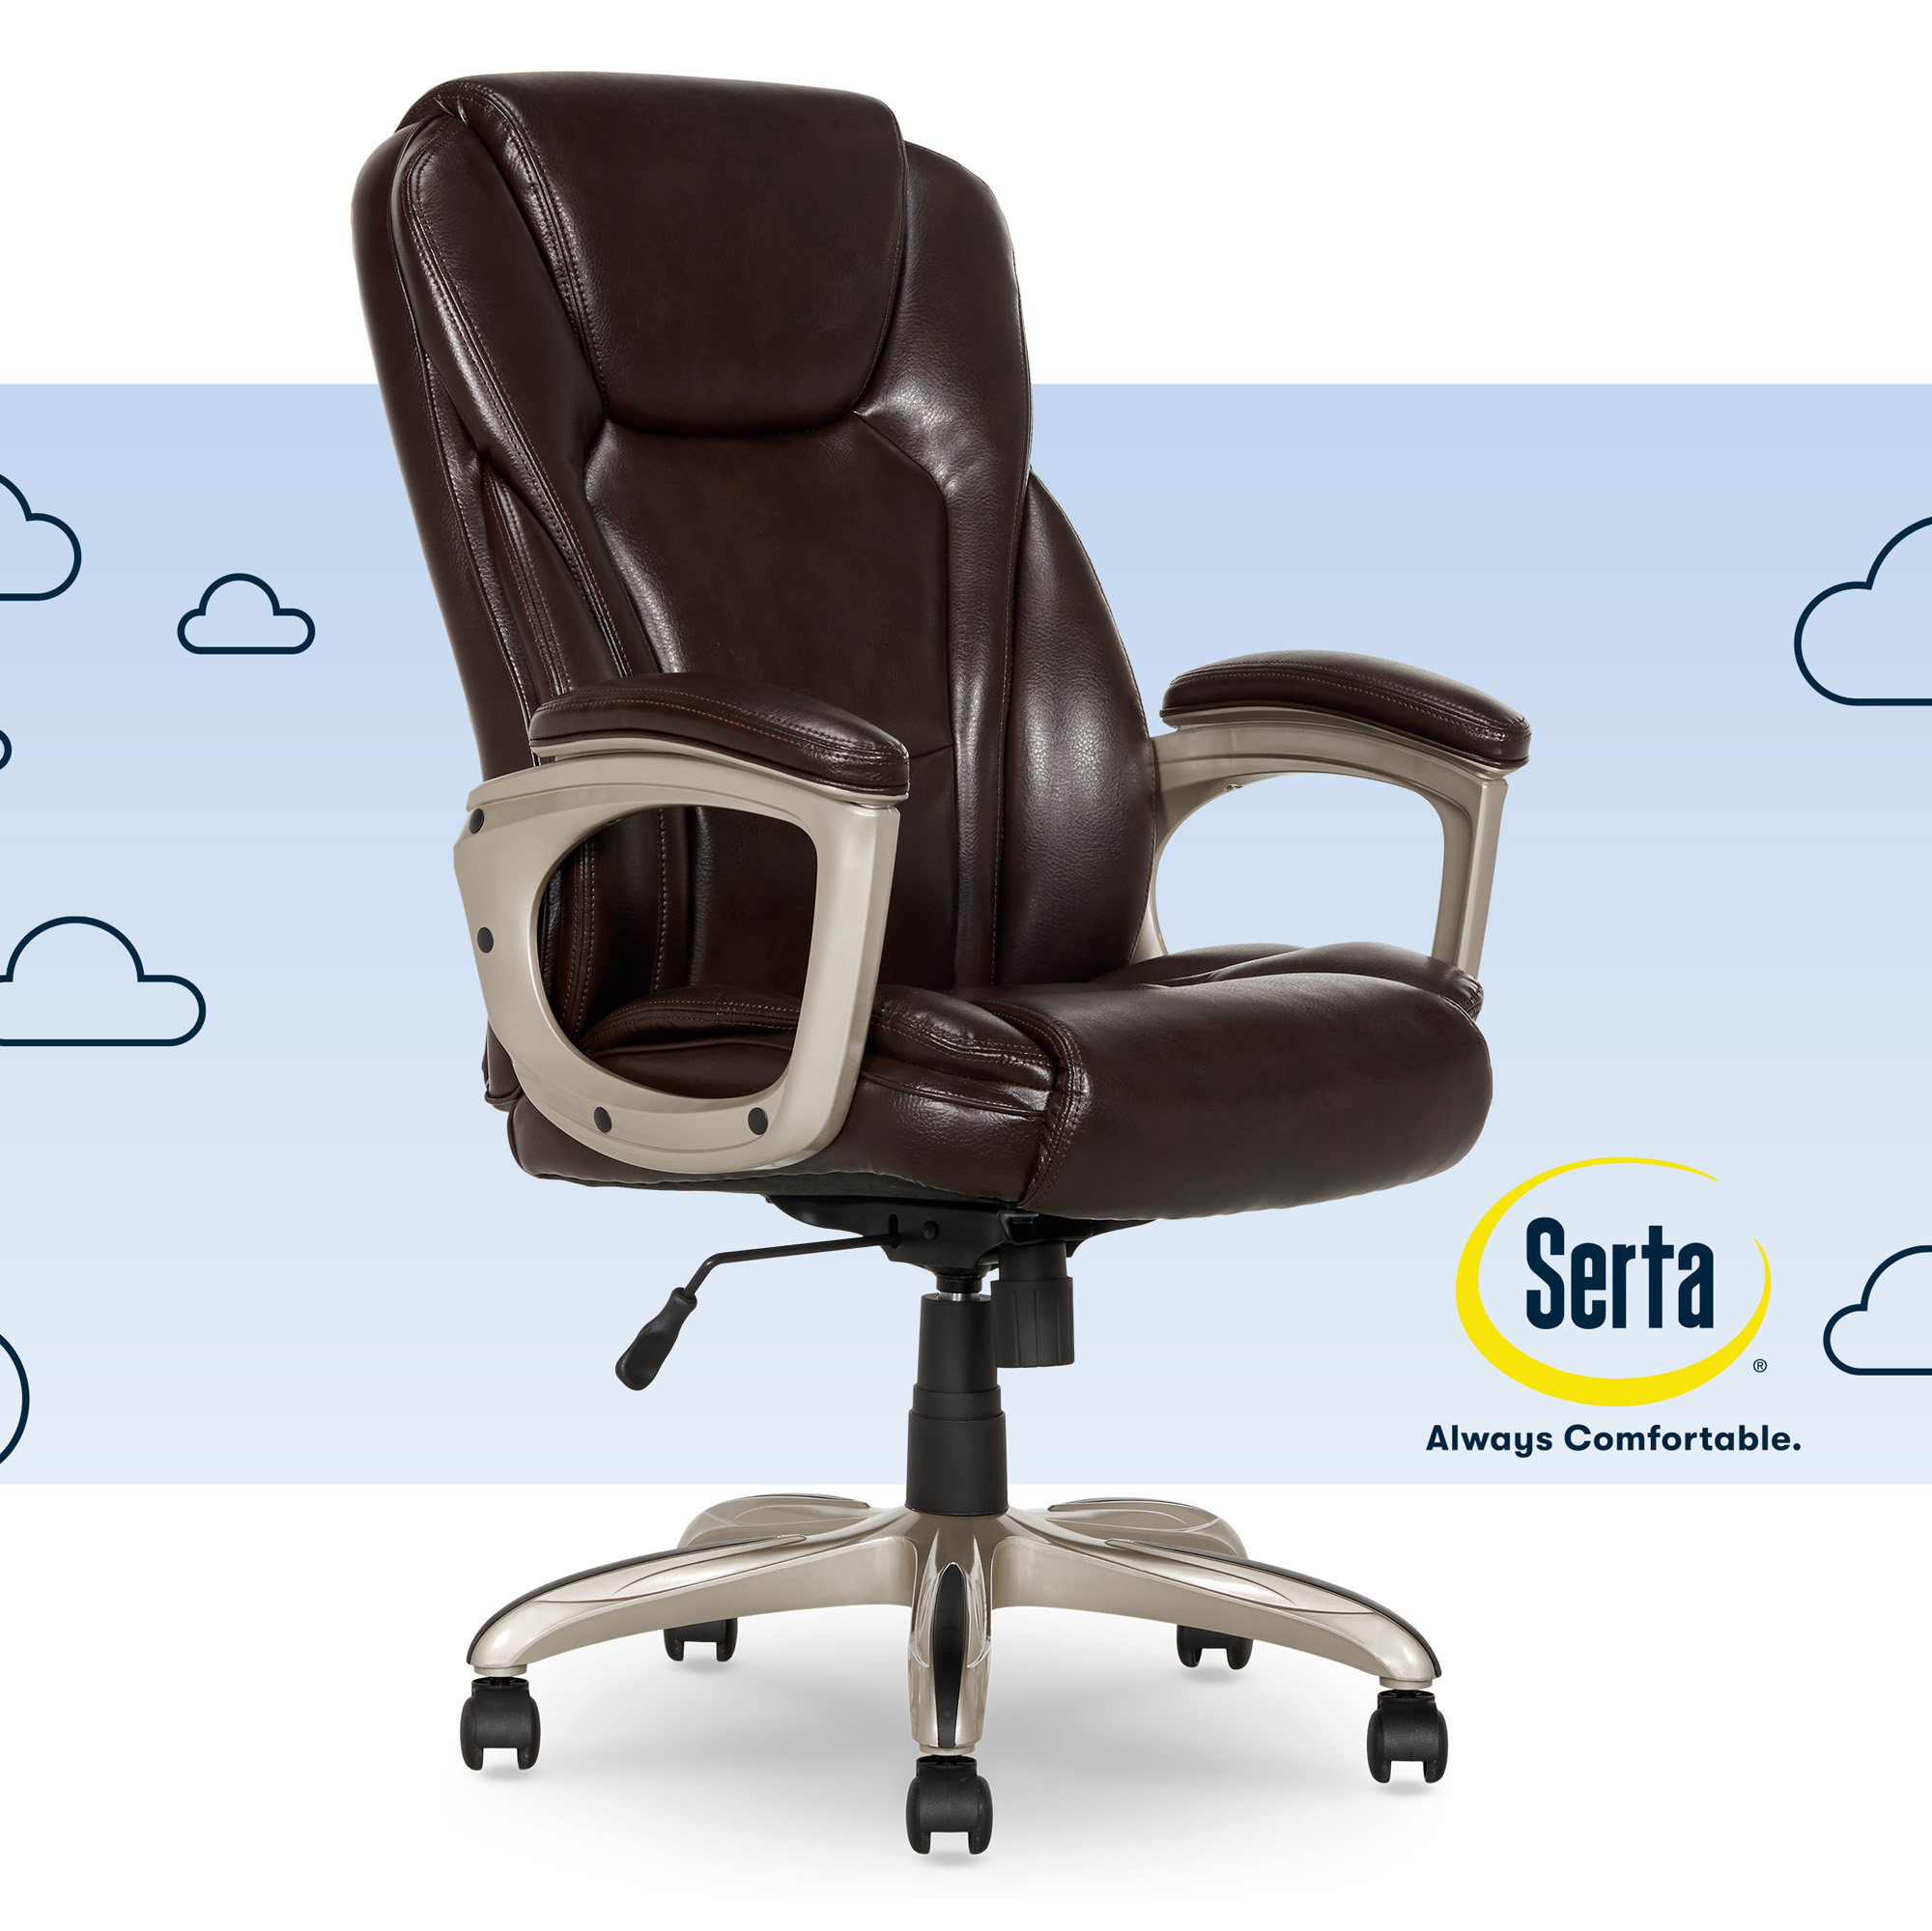 Serta Heavy-Duty Bonded Leather Commercial Office Chair with Memory Foam, 350 lb capacity, Brown - image 1 of 8